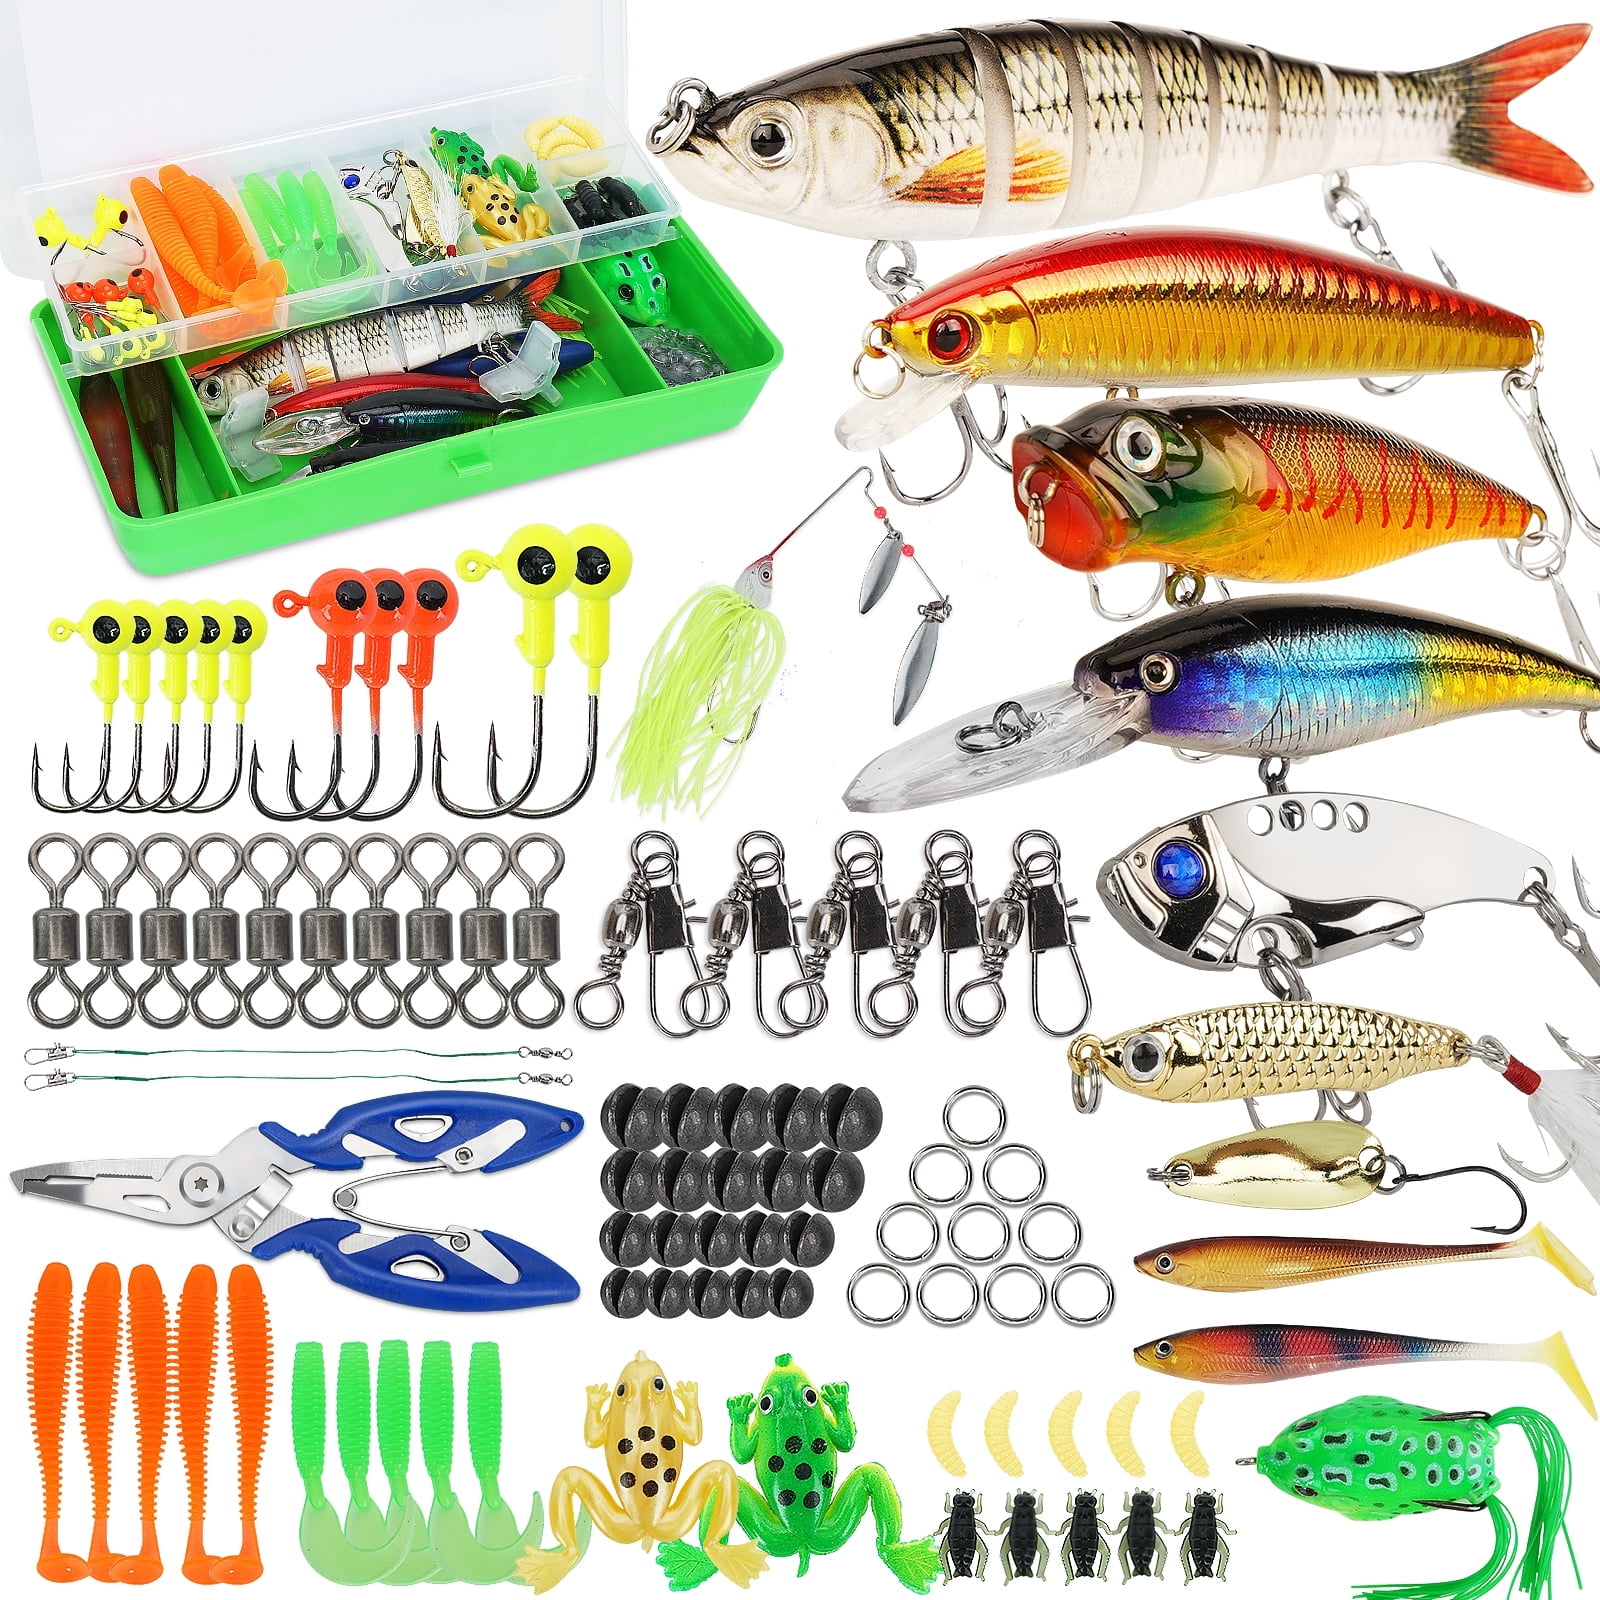 Fishing Lures Metal VIB Tail Spinners Bait Jigs Blade Baits Bass Crankbait  Fishing Spinner Blade for Bass Fishing Lure Kit with Tackle Box, Spinners 